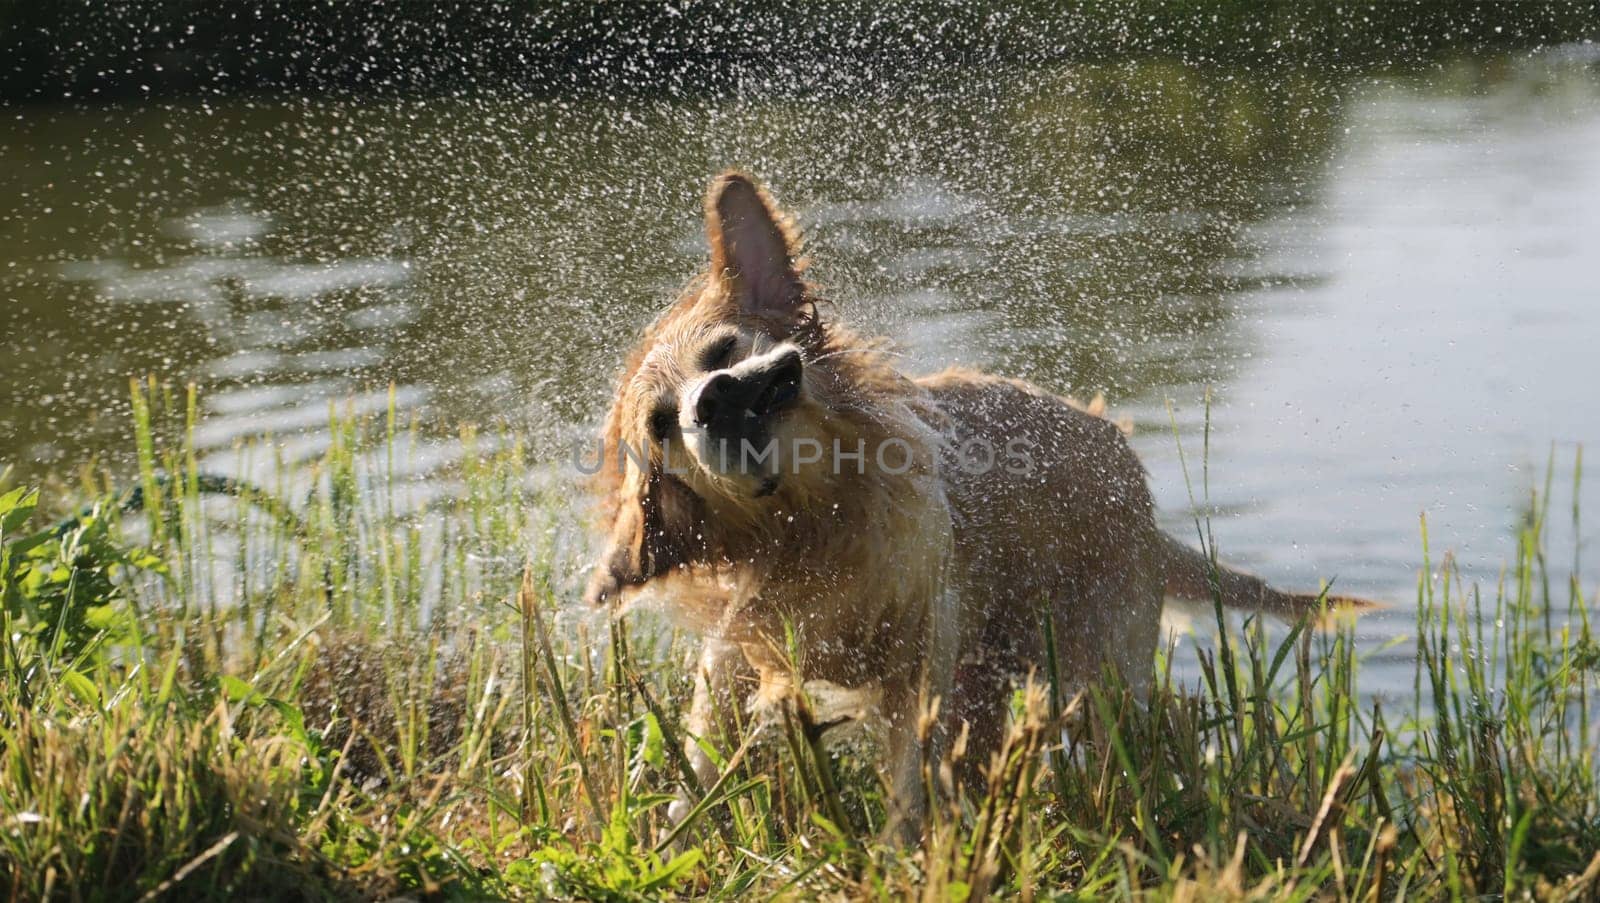 Golden retriever dog shaking off water drops after swimming in river. Wet labrador doggy pet drying itself near lake